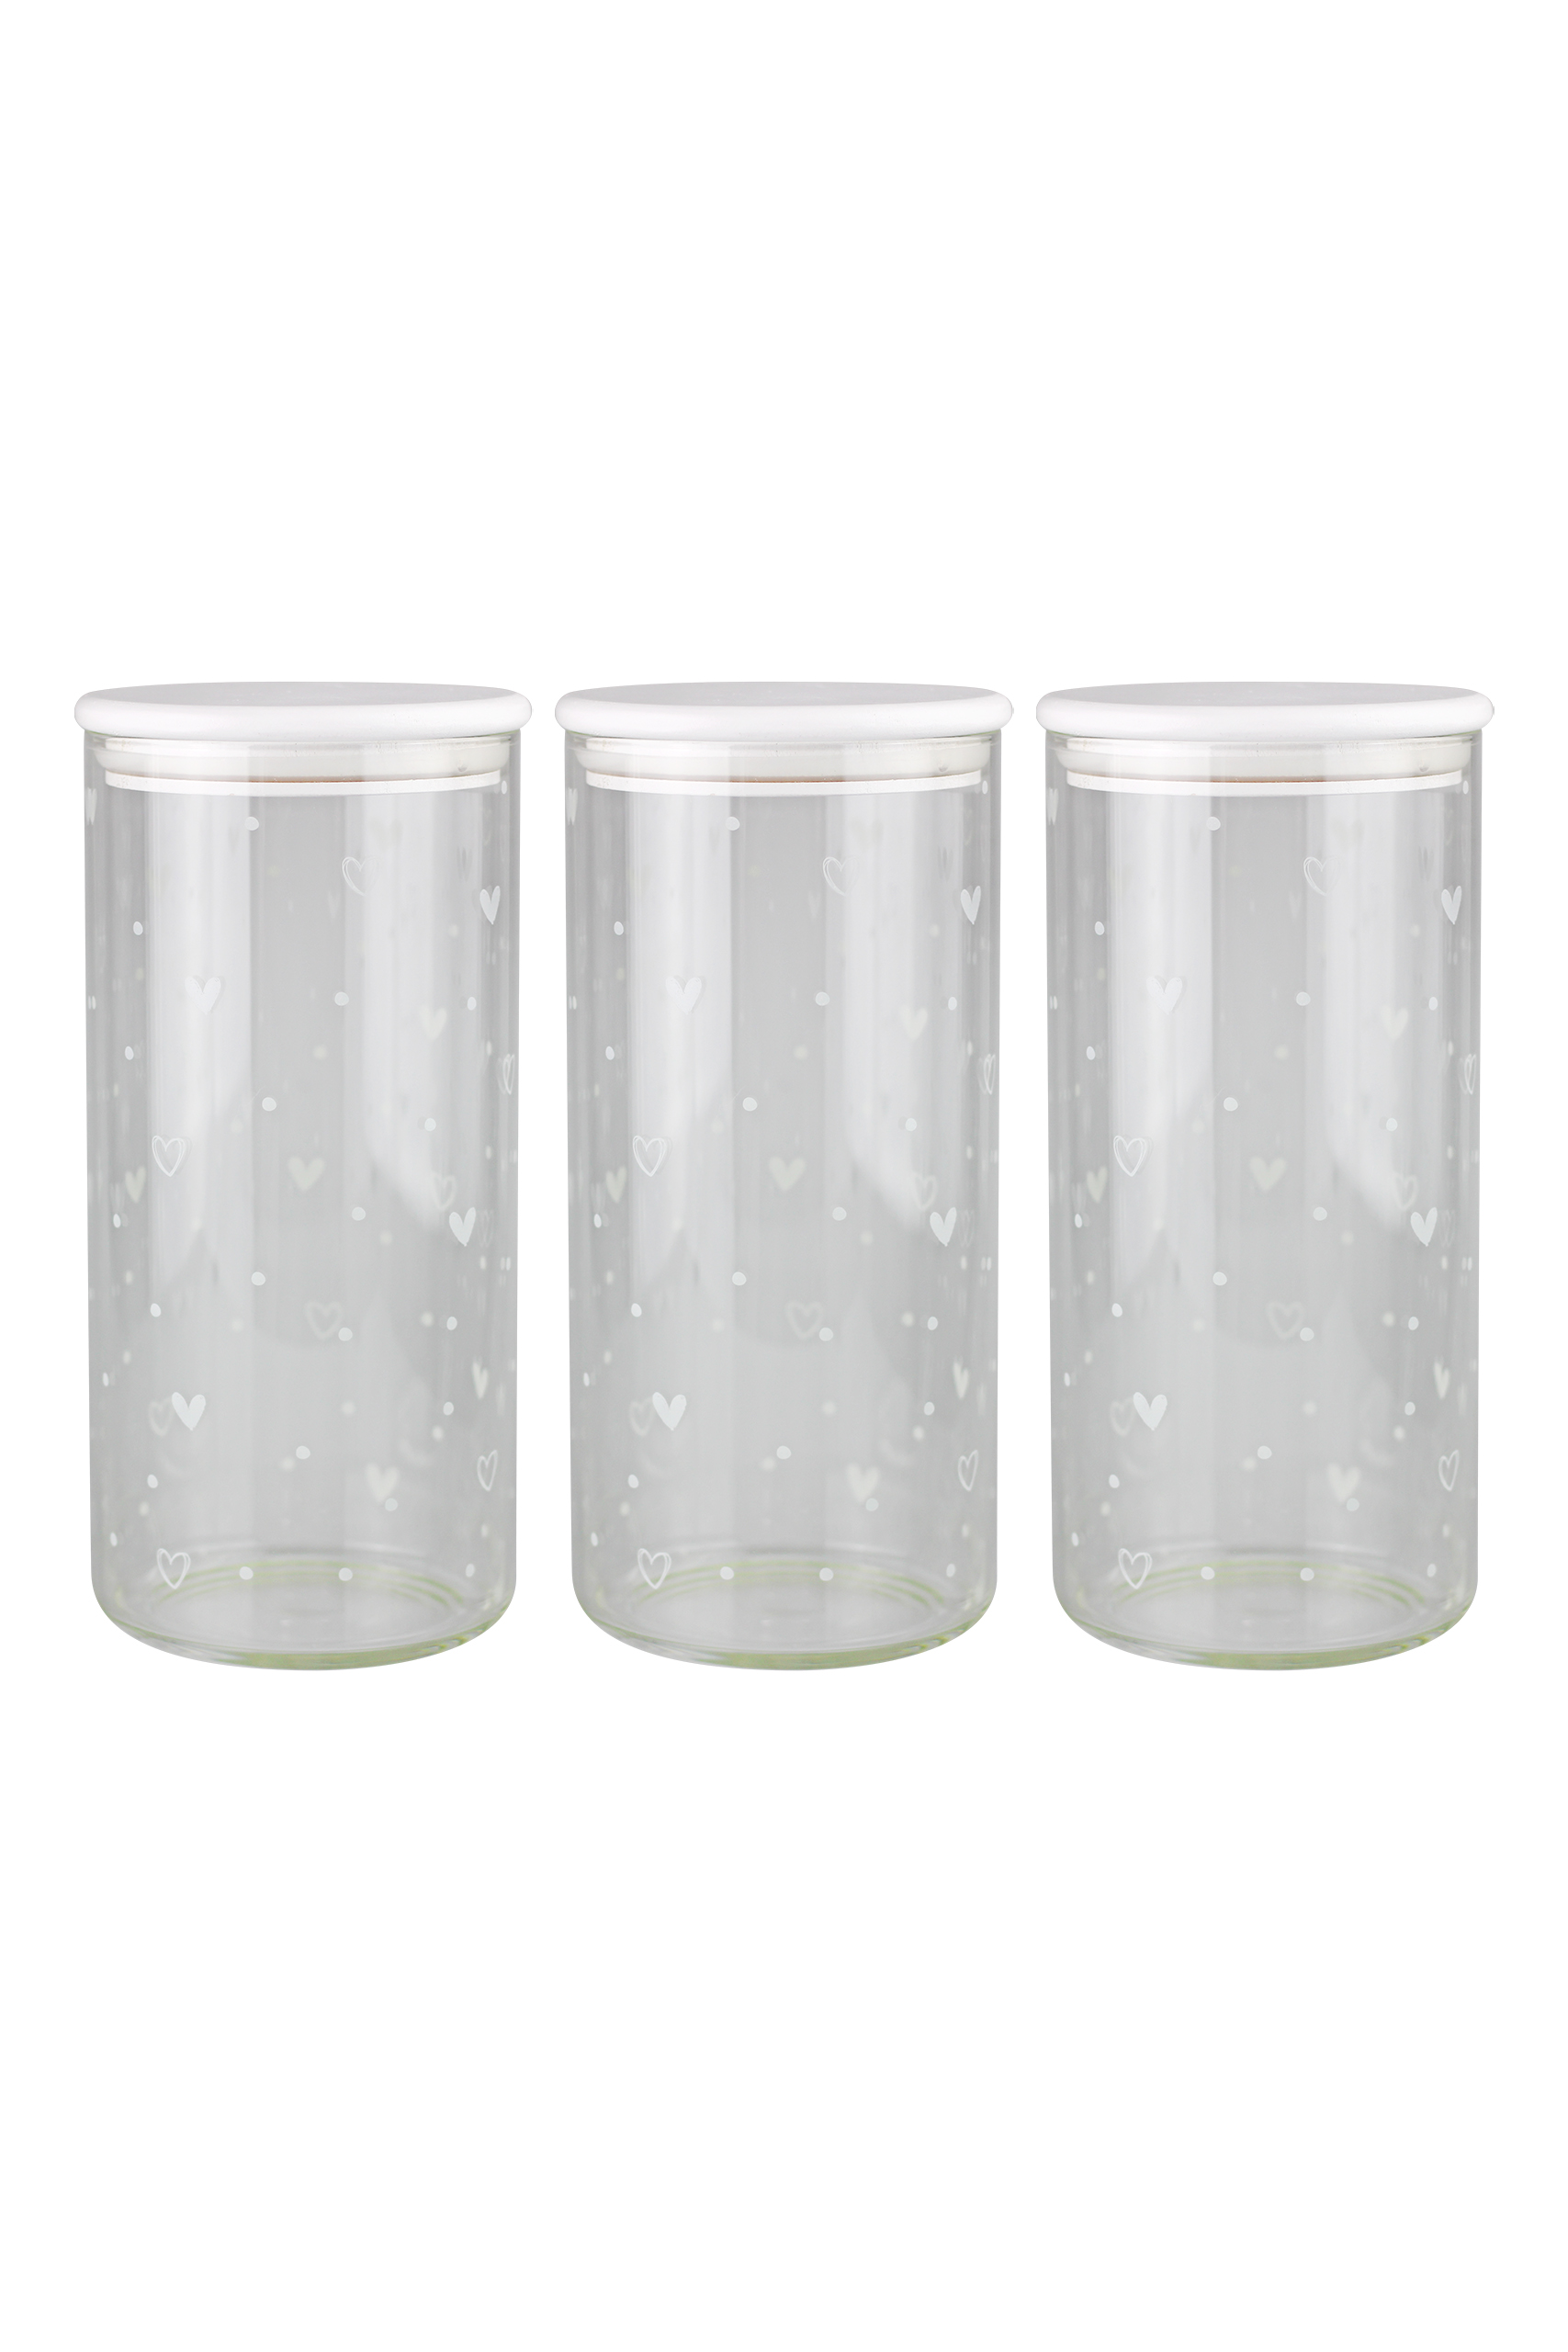 Set 3 Glass White Hearts and Dots Bamboo Storage Jars - White lid 1400 | Pretty Little Home